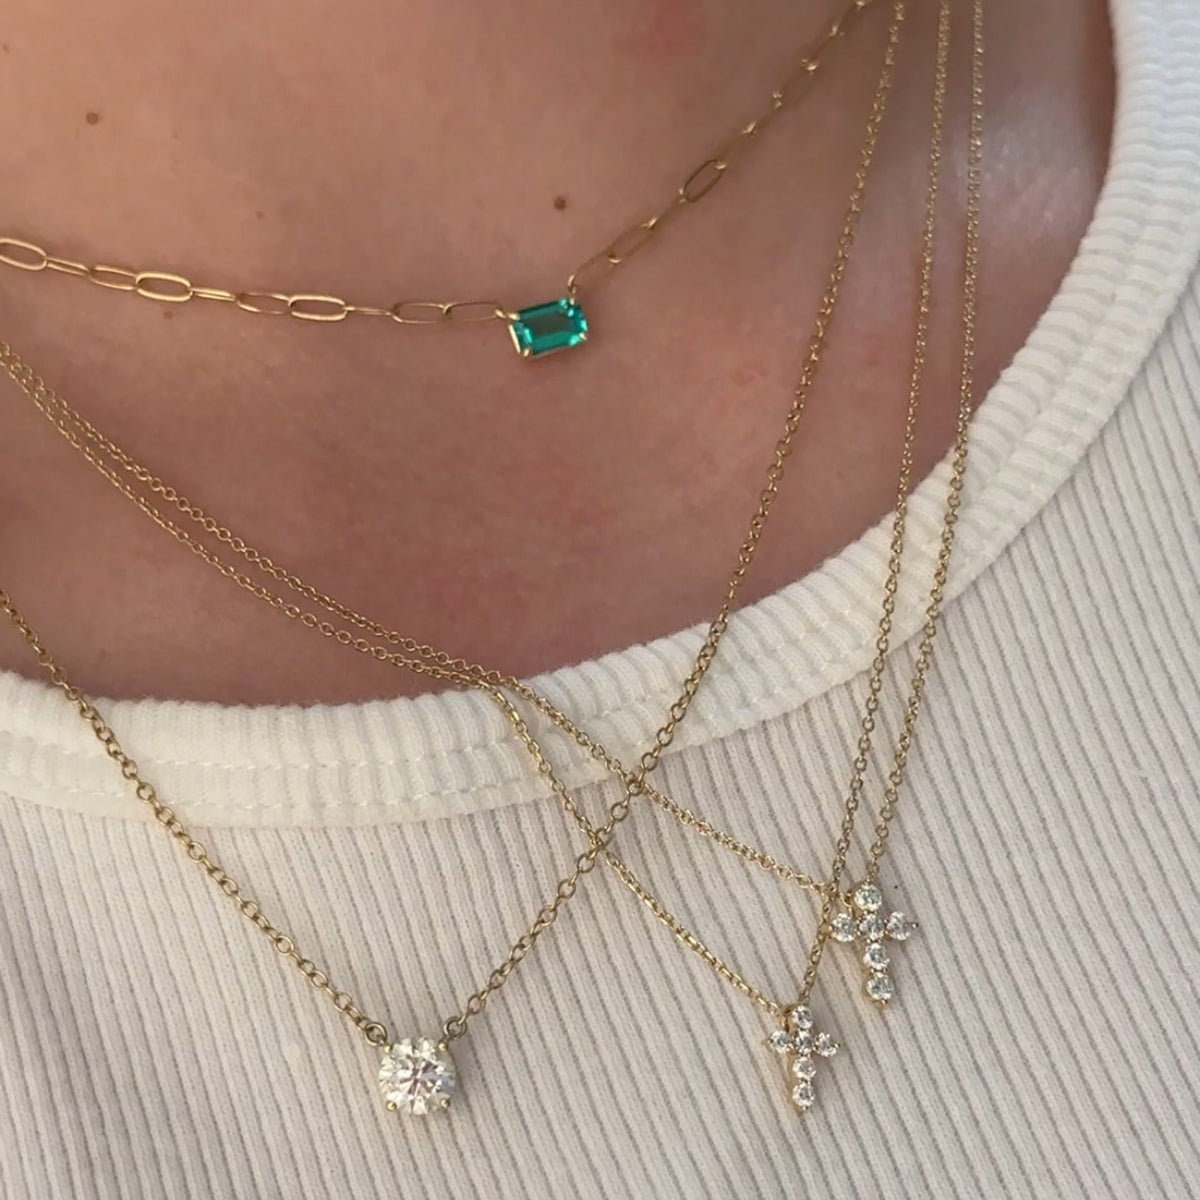 Emerald on Long Link Chain Necklace